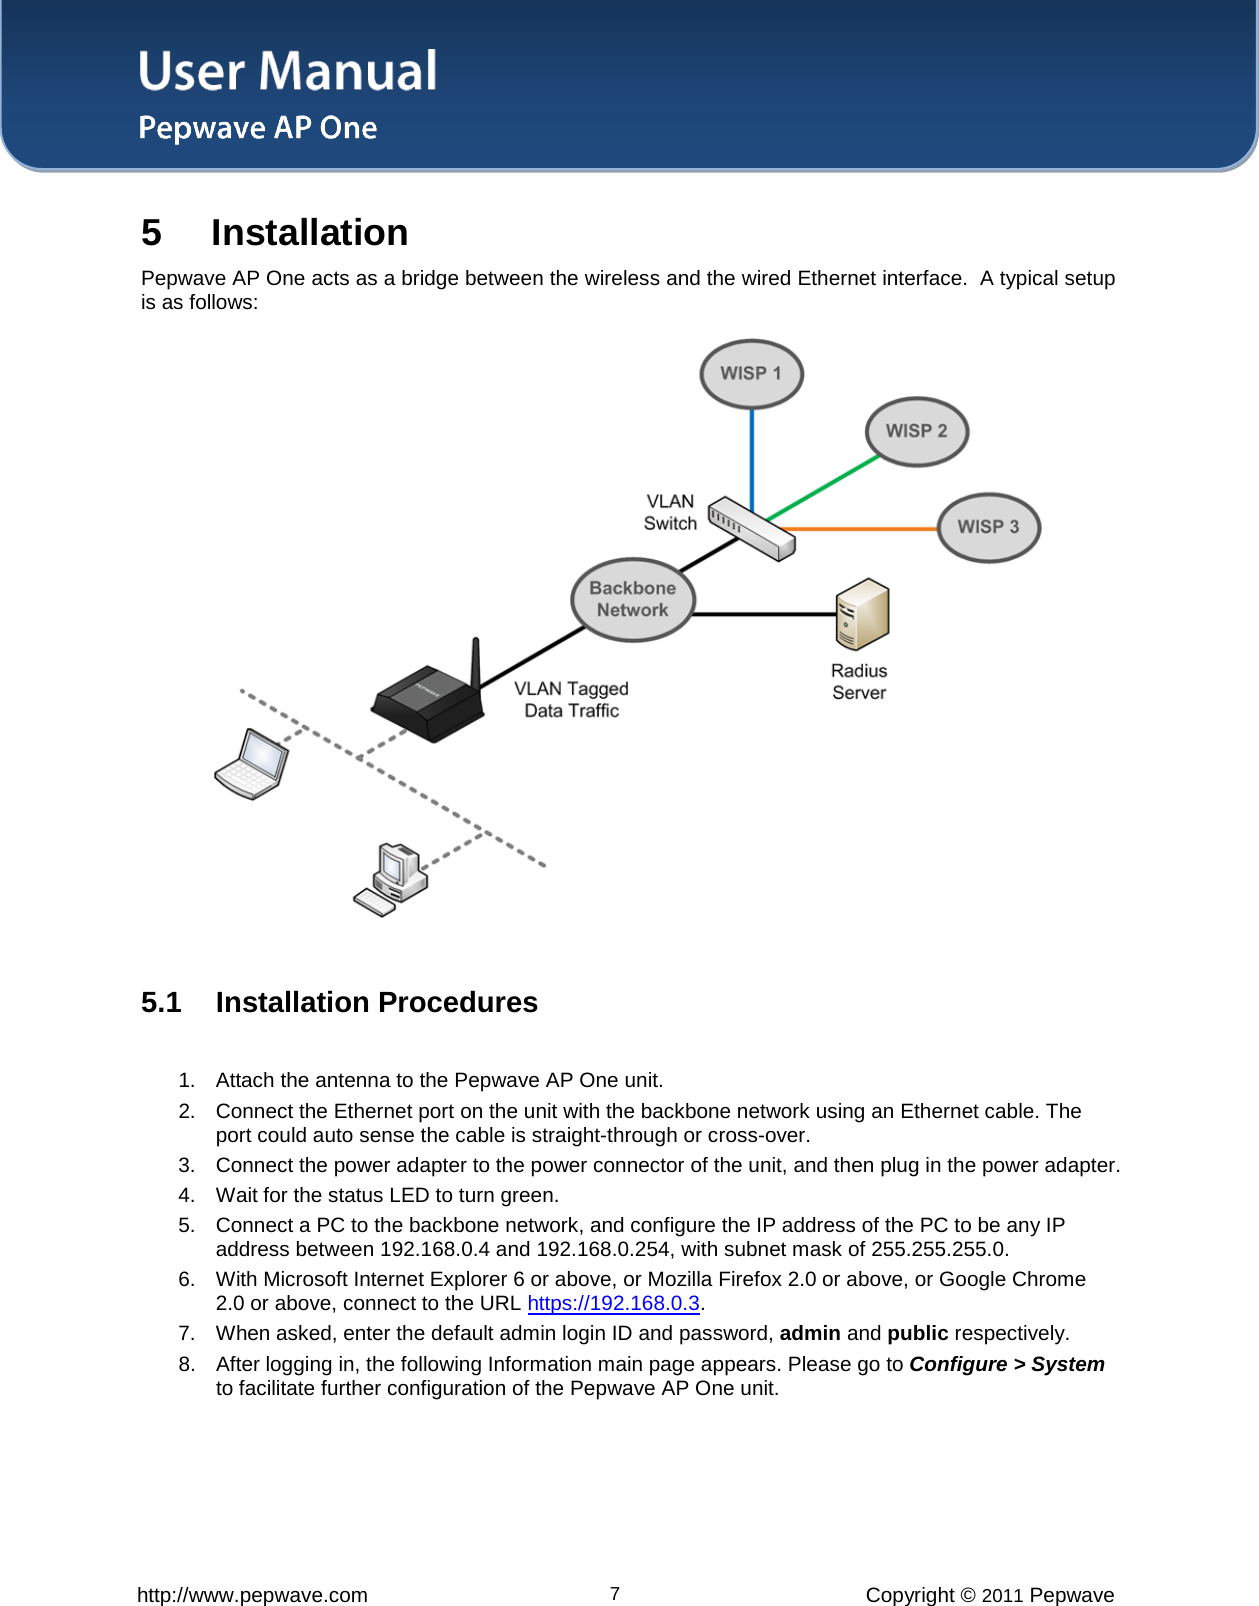 User Manual   http://www.pepwave.com 7 Copyright © 2011 Pepwave  5 Installation Pepwave AP One acts as a bridge between the wireless and the wired Ethernet interface.  A typical setup is as follows:   5.1 Installation Procedures  1. Attach the antenna to the Pepwave AP One unit.  2. Connect the Ethernet port on the unit with the backbone network using an Ethernet cable. The port could auto sense the cable is straight-through or cross-over.  3. Connect the power adapter to the power connector of the unit, and then plug in the power adapter.  4. Wait for the status LED to turn green.  5. Connect a PC to the backbone network, and configure the IP address of the PC to be any IP address between 192.168.0.4 and 192.168.0.254, with subnet mask of 255.255.255.0.  6. With Microsoft Internet Explorer 6 or above, or Mozilla Firefox 2.0 or above, or Google Chrome 2.0 or above, connect to the URL https://192.168.0.3. 7. When asked, enter the default admin login ID and password, admin and public respectively.  8. After logging in, the following Information main page appears. Please go to Configure &gt; System to facilitate further configuration of the Pepwave AP One unit.   